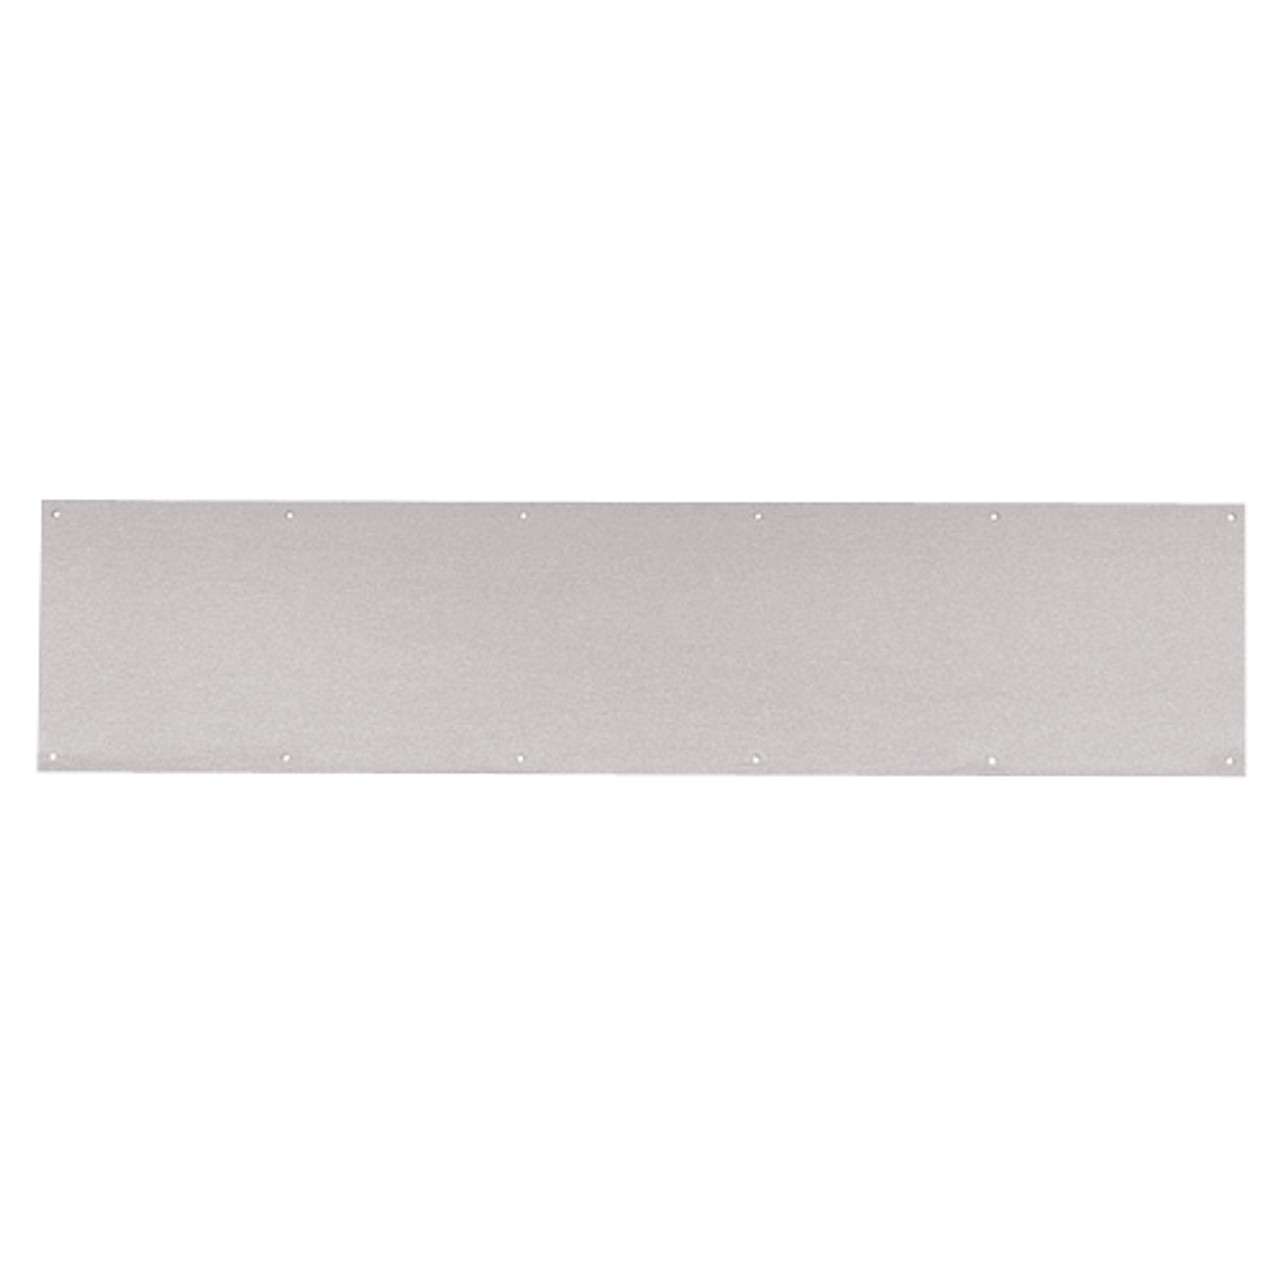 8400-US32D-8x44.5-B-CS Ives 8400 Series Protection Plate in Satin Stainless Steel